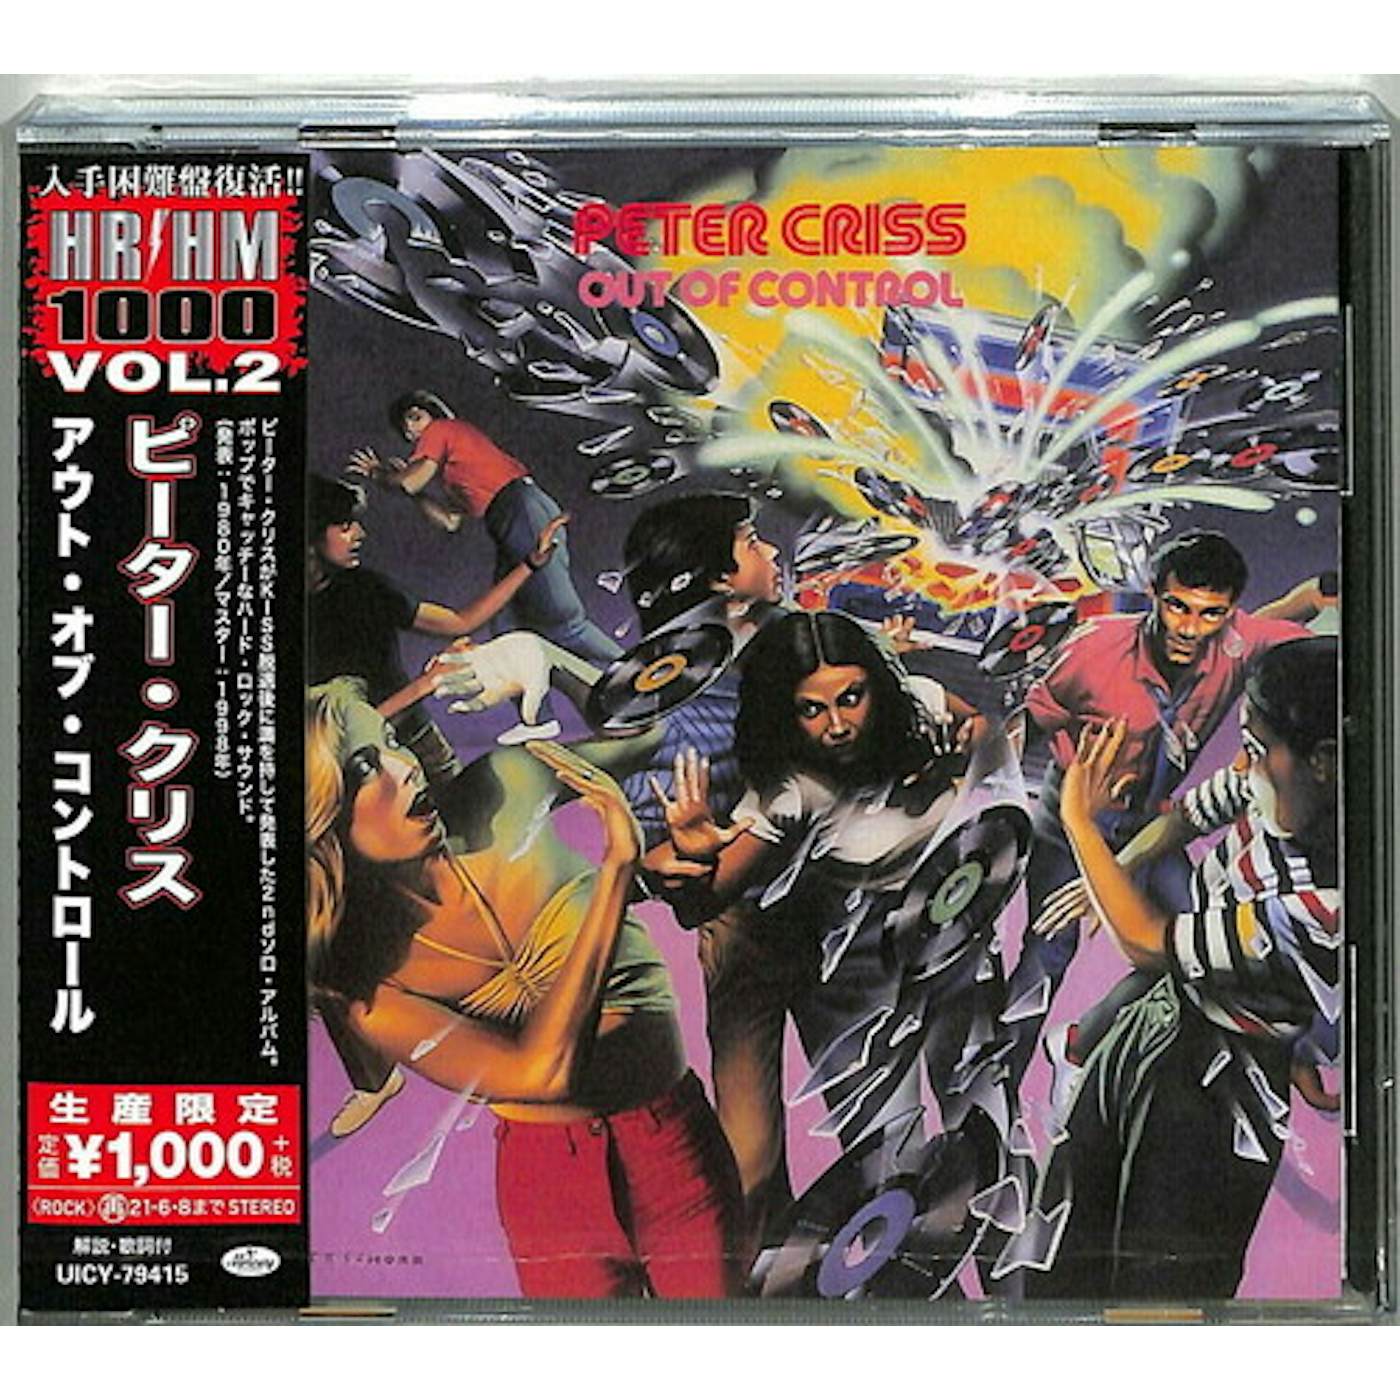 Peter Criss OUT OF CONTROL CD